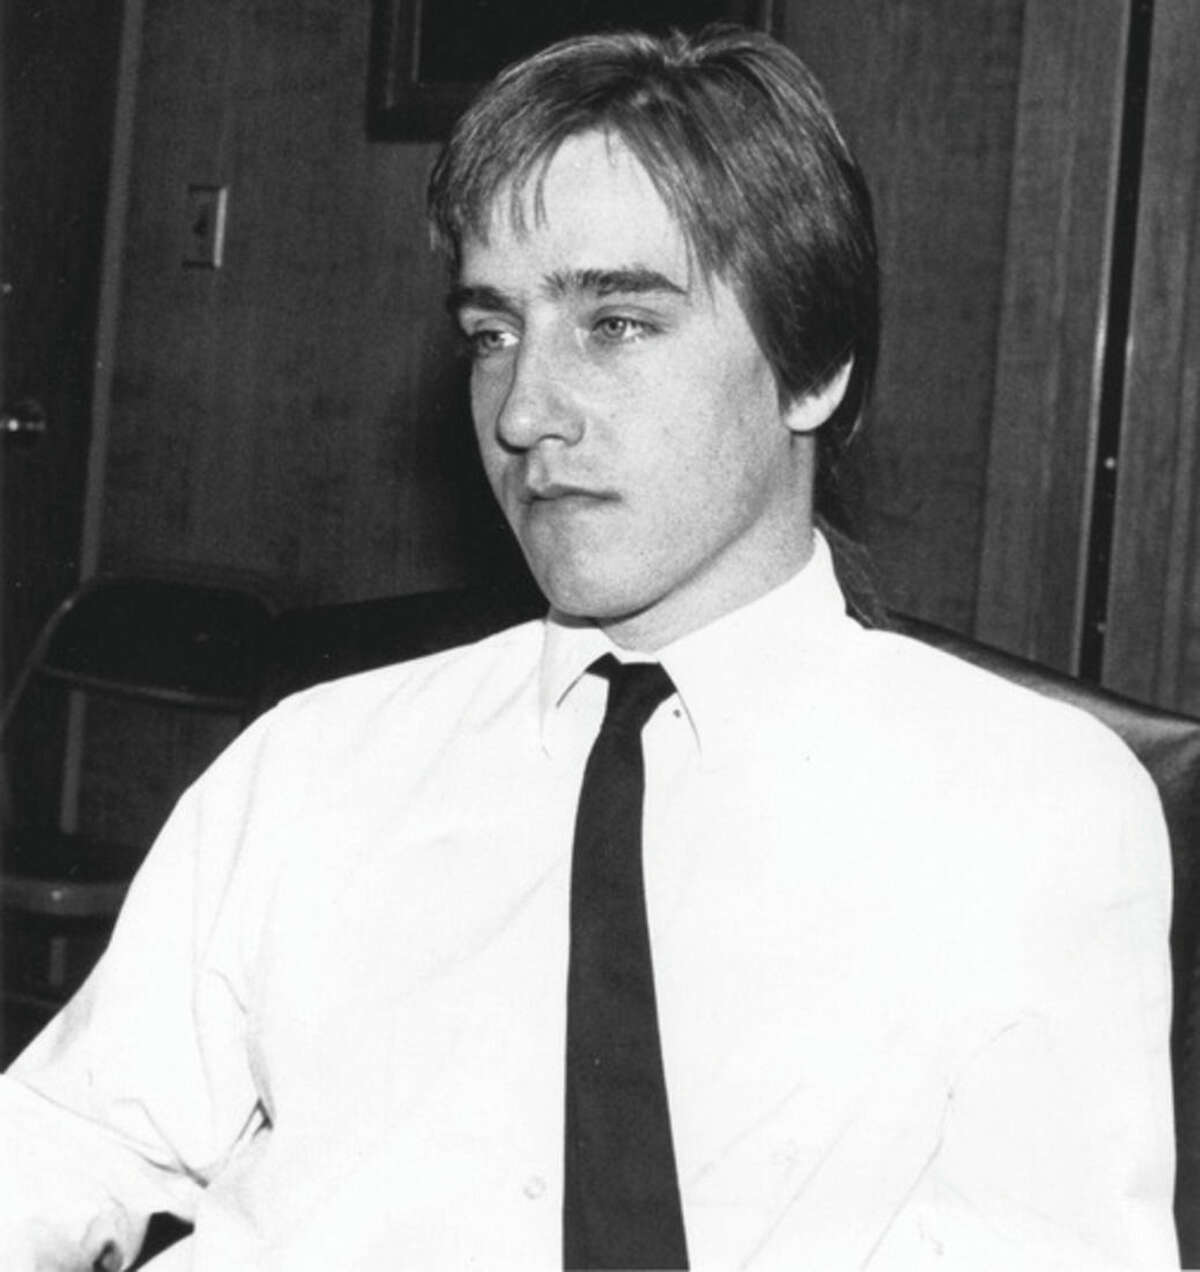 This 1990 photo shows Derek Oatis in Connecticut. Oatis was arrested in 1984 for trafficking cocaine from Venezuela for his fellow prep school classmates at Choate Rosemary Hall in Wallingford, Conn. More than 30 years later, he runs a law practice in Manchester, Conn. His story inspired the new film, ?’The Preppie Connection." (Howard Iwanicki/Record-Journal via AP) MANDATORY CREDIT